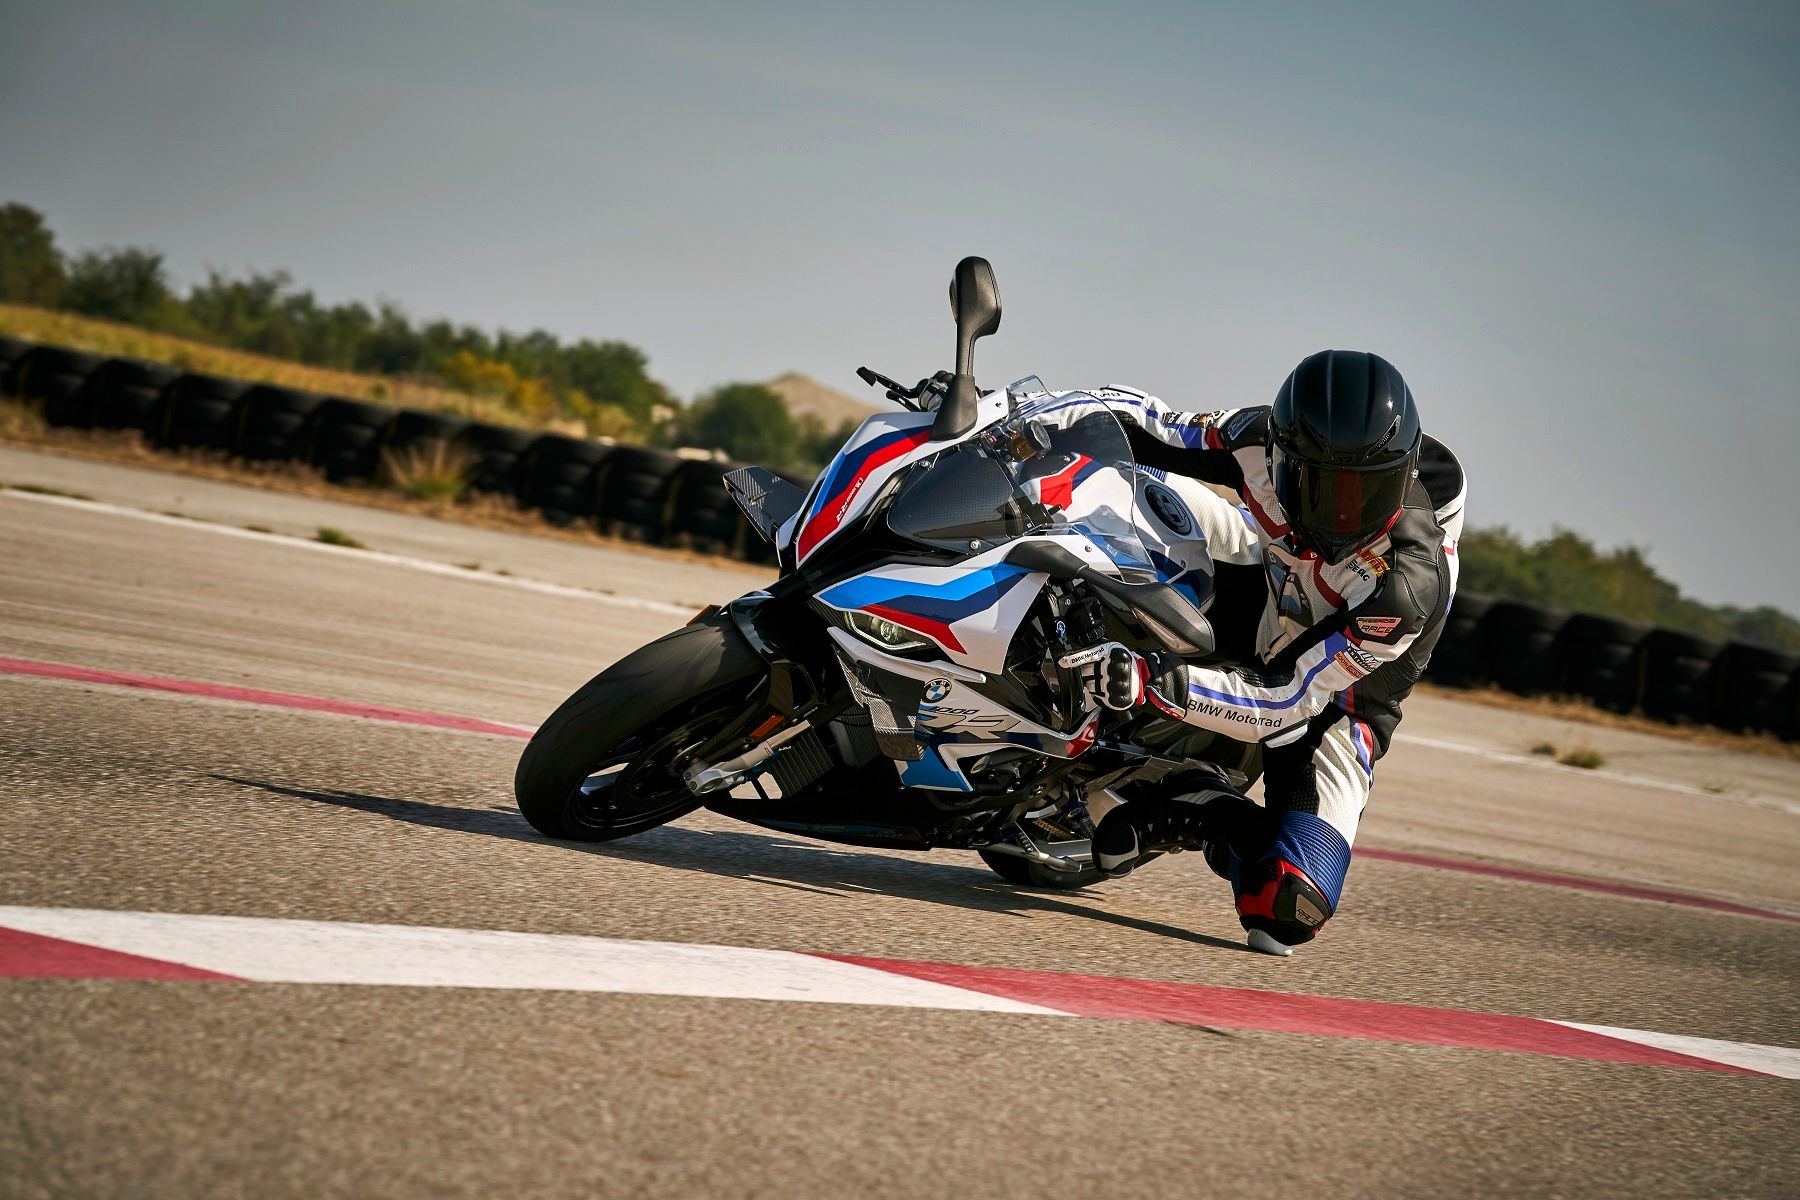 BMW M 1000 RR Launched In India At Rs 42 Lakh